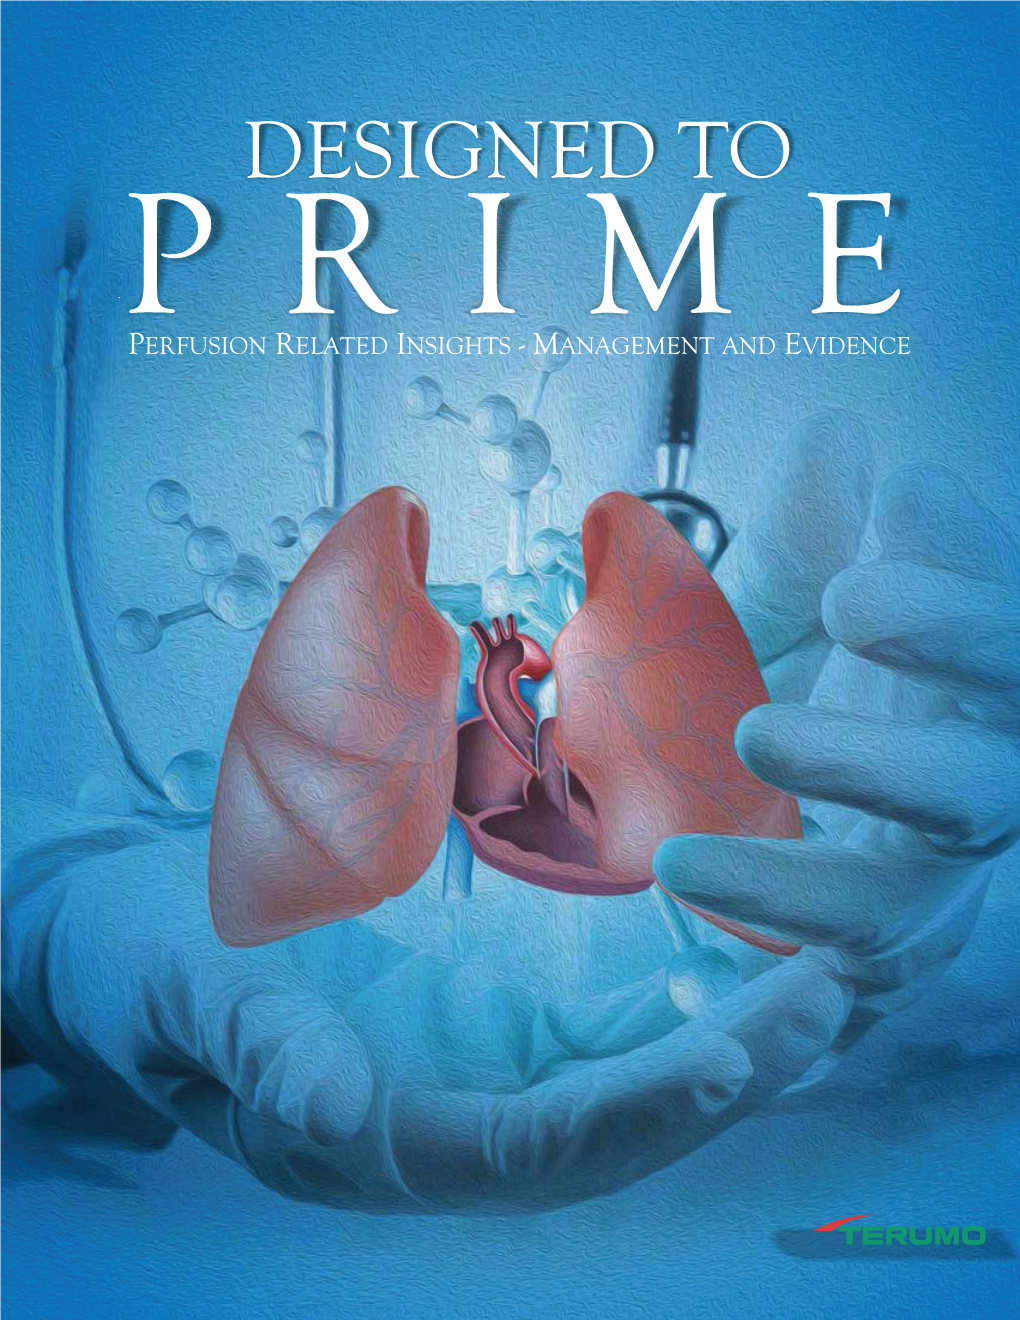 DESIGNED to PRIME PERFUSION RELATED INSIGHTS - MANAGEMENT and EVIDENCE List of Editorial Board